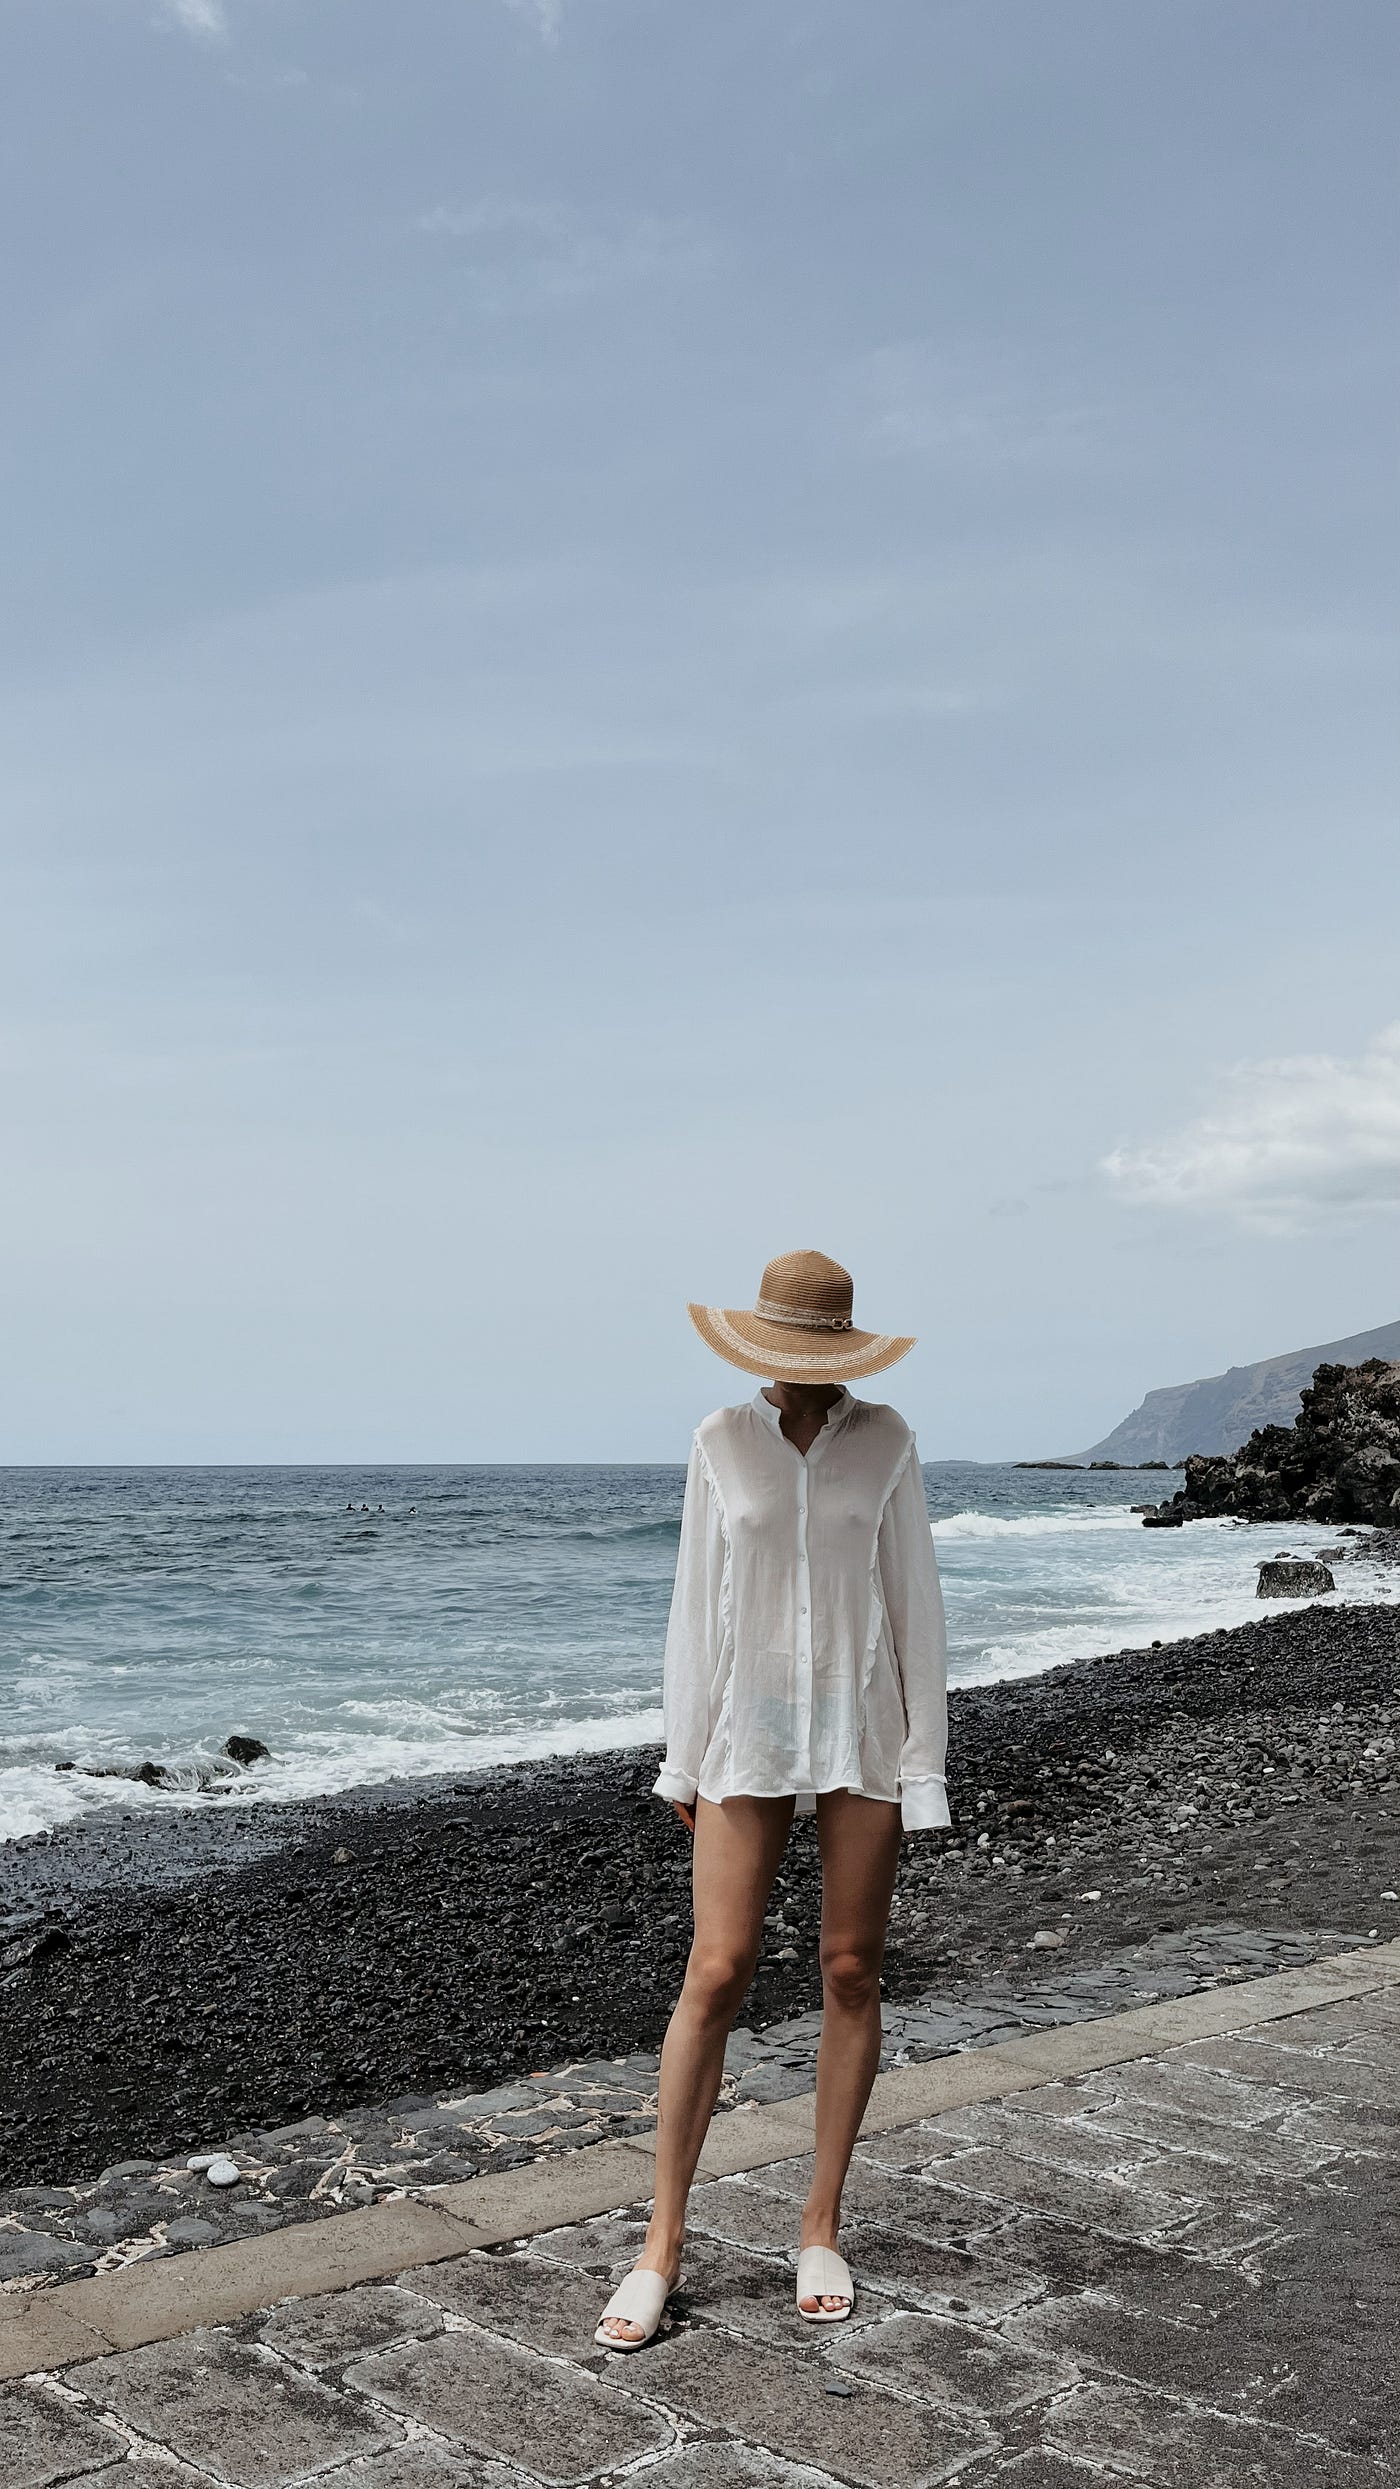 Playa de las Conchas, Tenerife. Not Daring to Surf, but a Daring Outfit, by Jane Evgeniia Dubrov